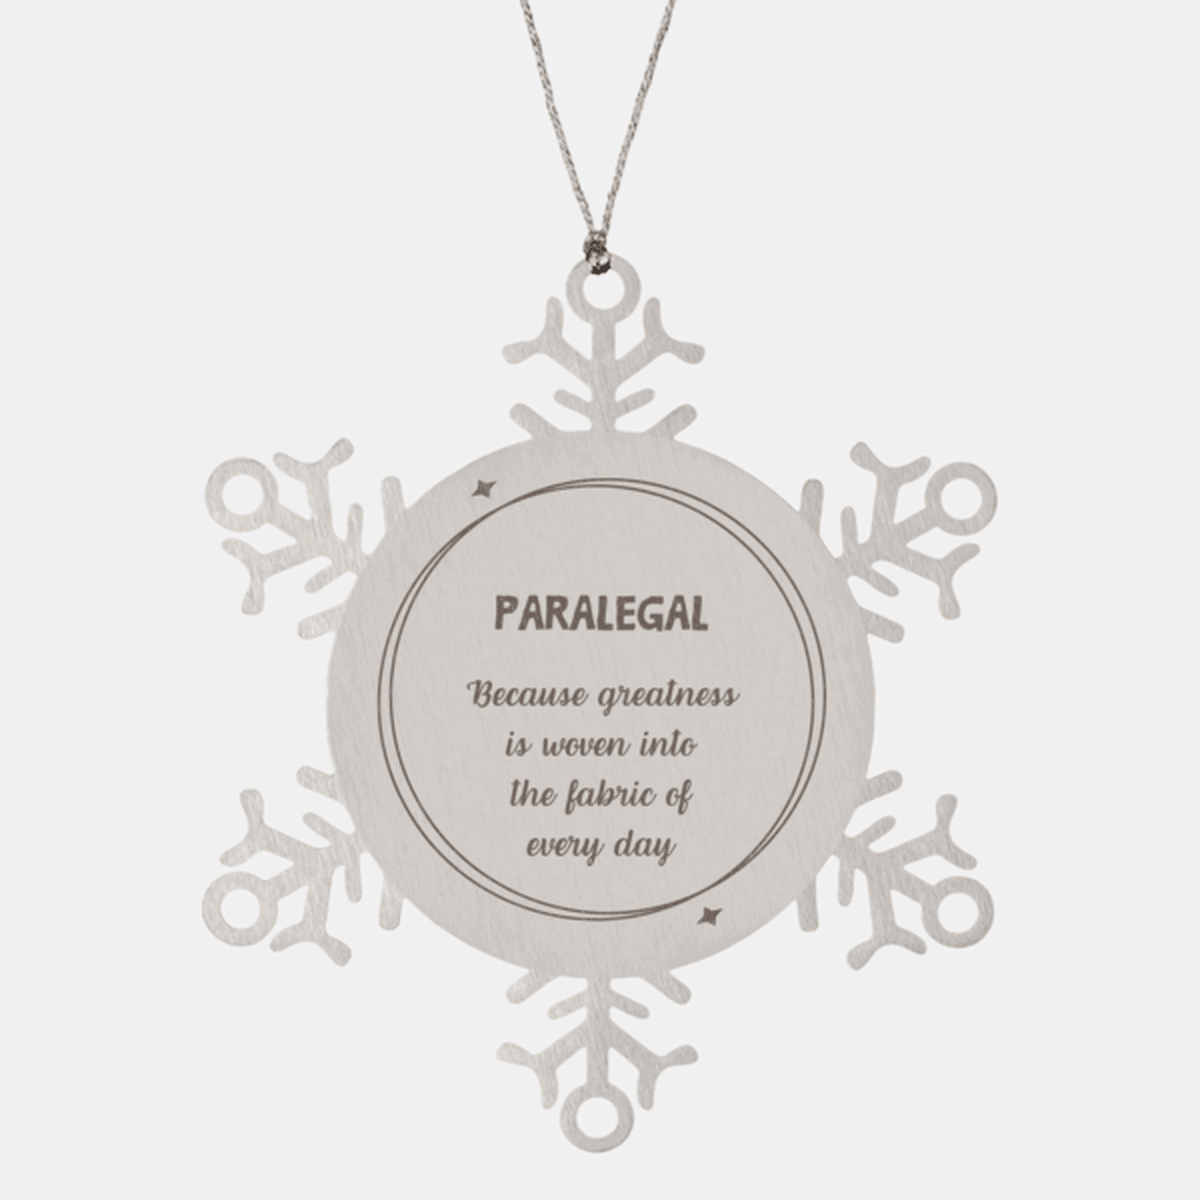 Sarcastic Paralegal Snowflake Ornament Gifts, Christmas Holiday Gifts for Paralegal Ornament, Paralegal: Because greatness is woven into the fabric of every day, Coworkers, Friends - Mallard Moon Gift Shop